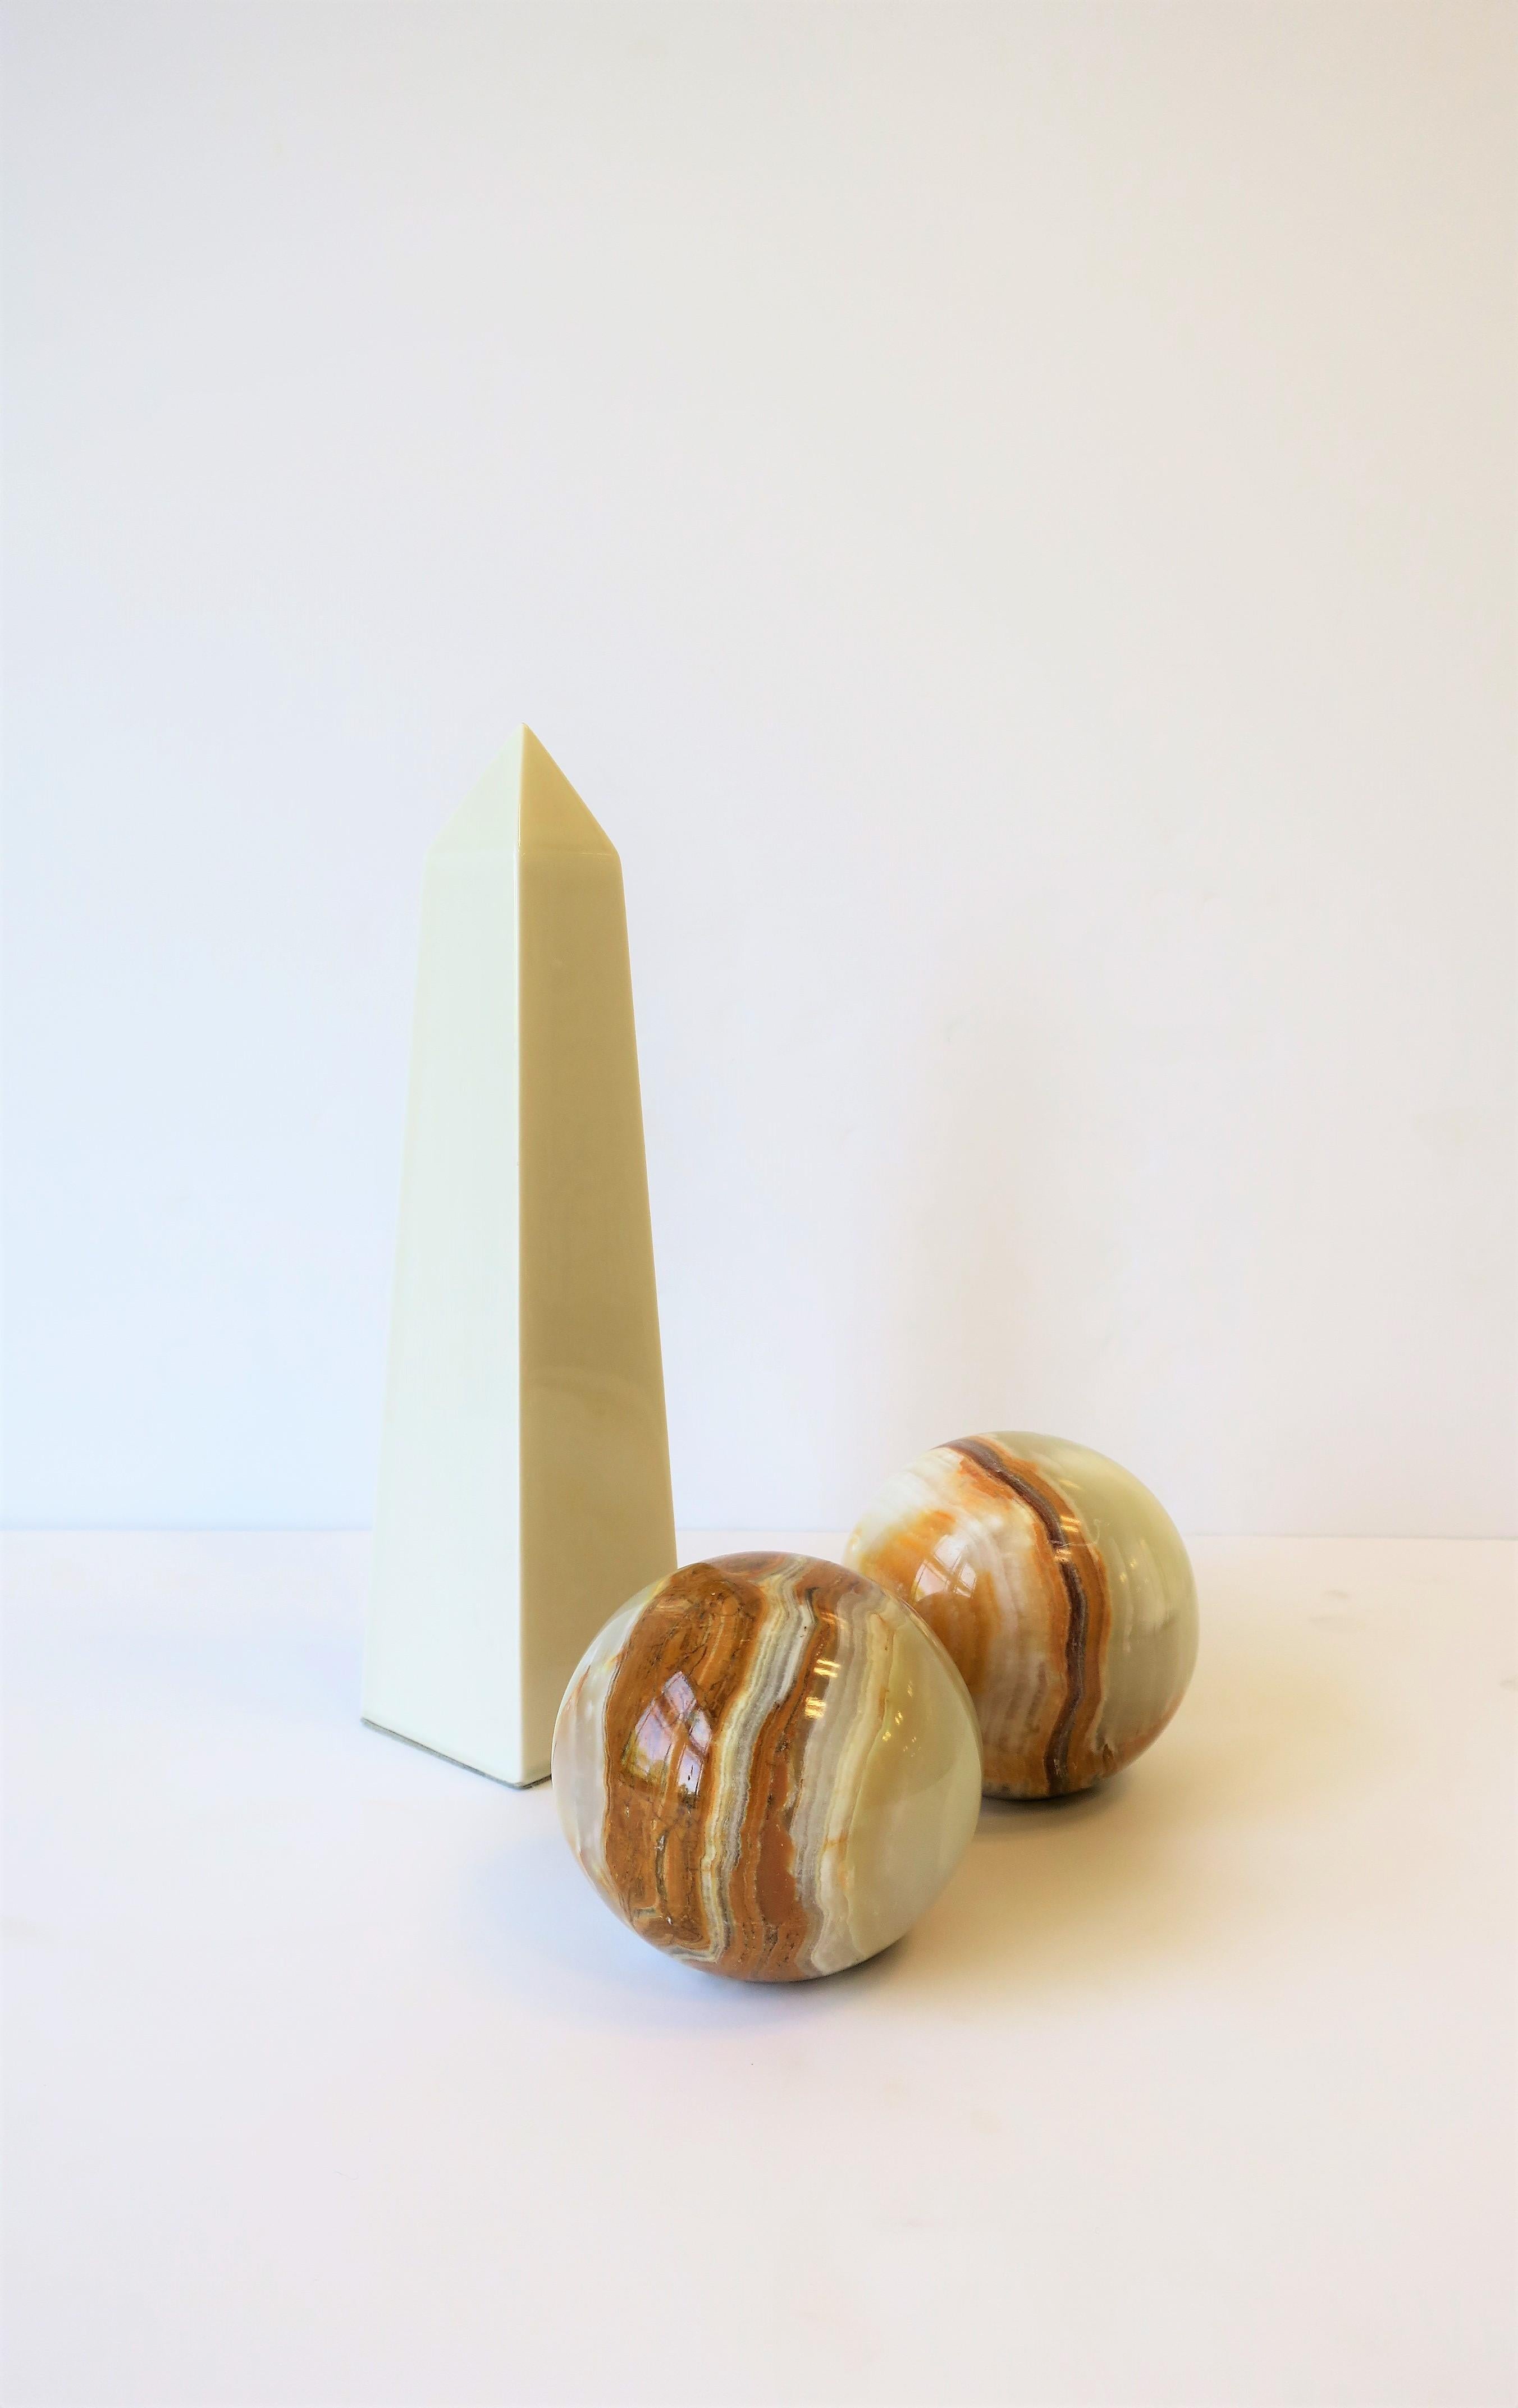 European Onyx Bookends or Decorative Objects